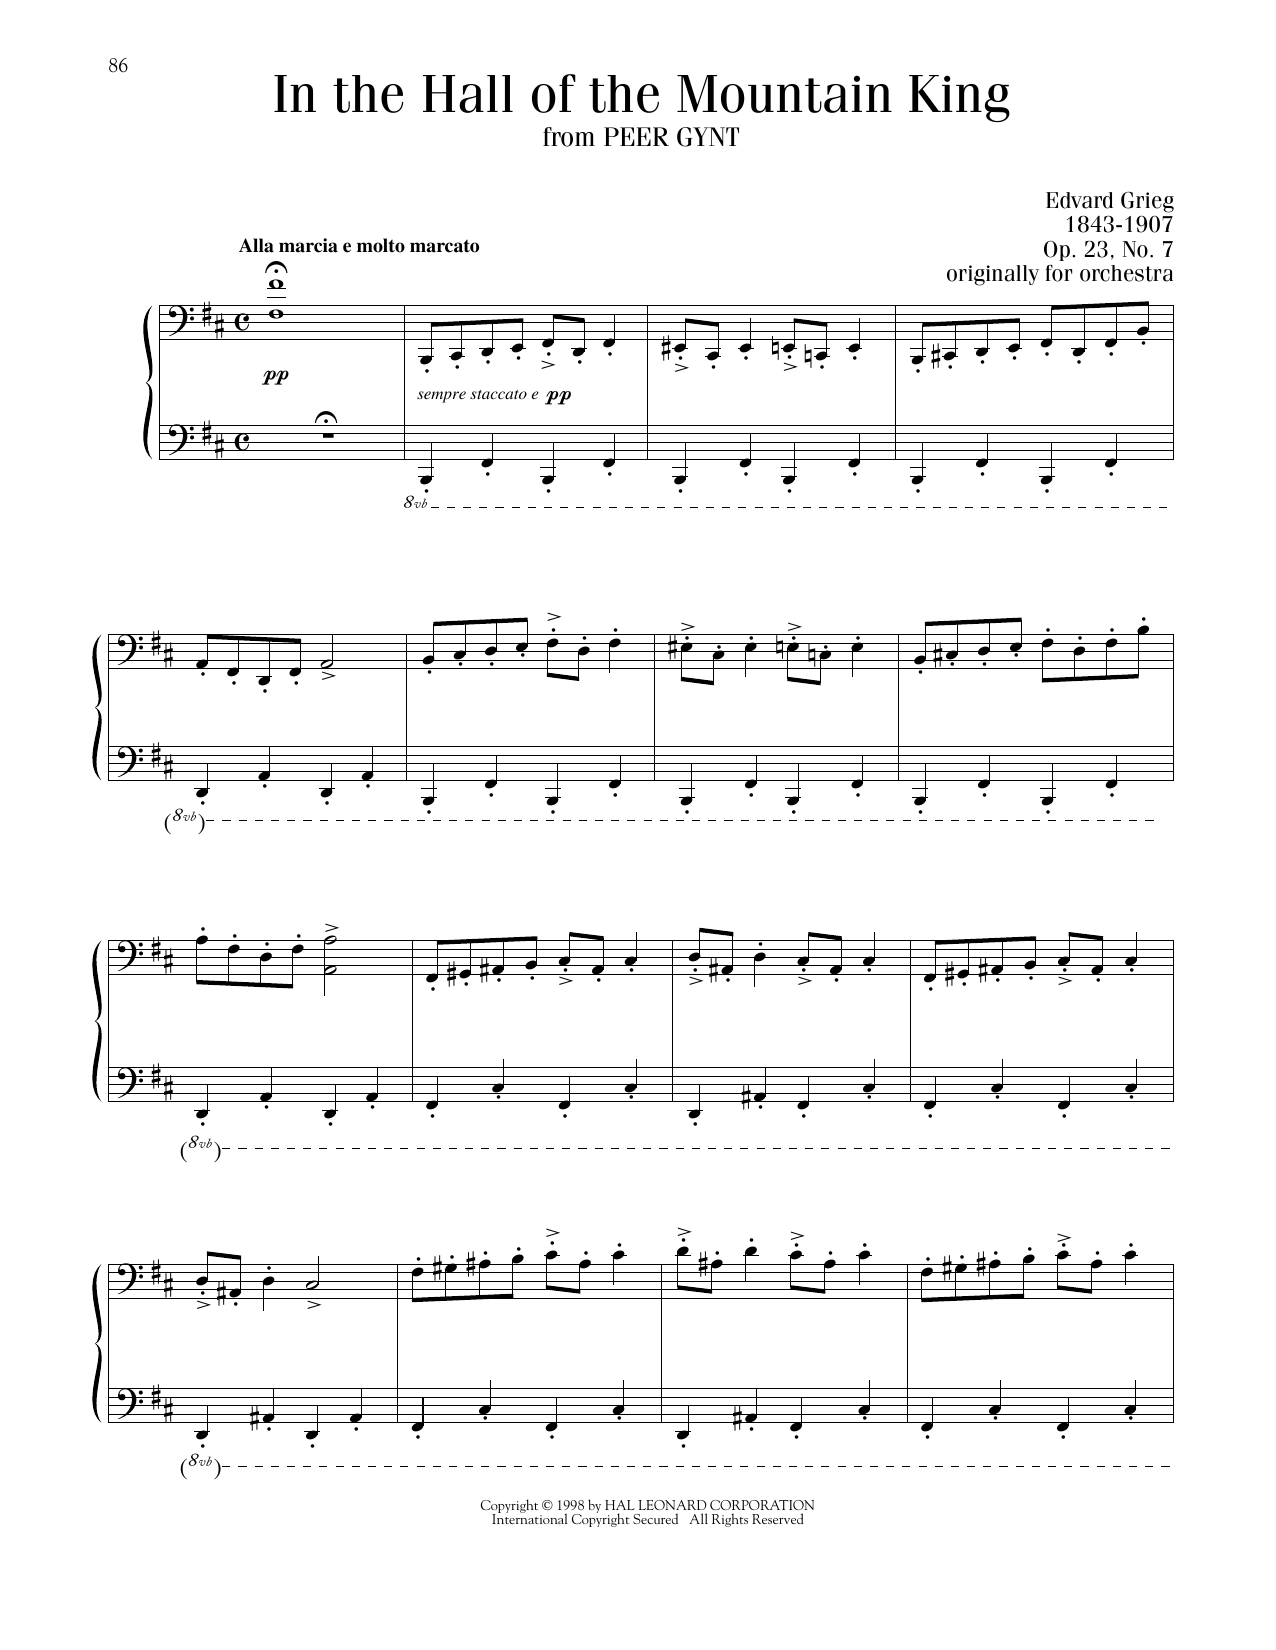 Edvard Grieg In The Hall Of The Mountain King sheet music notes printable PDF score